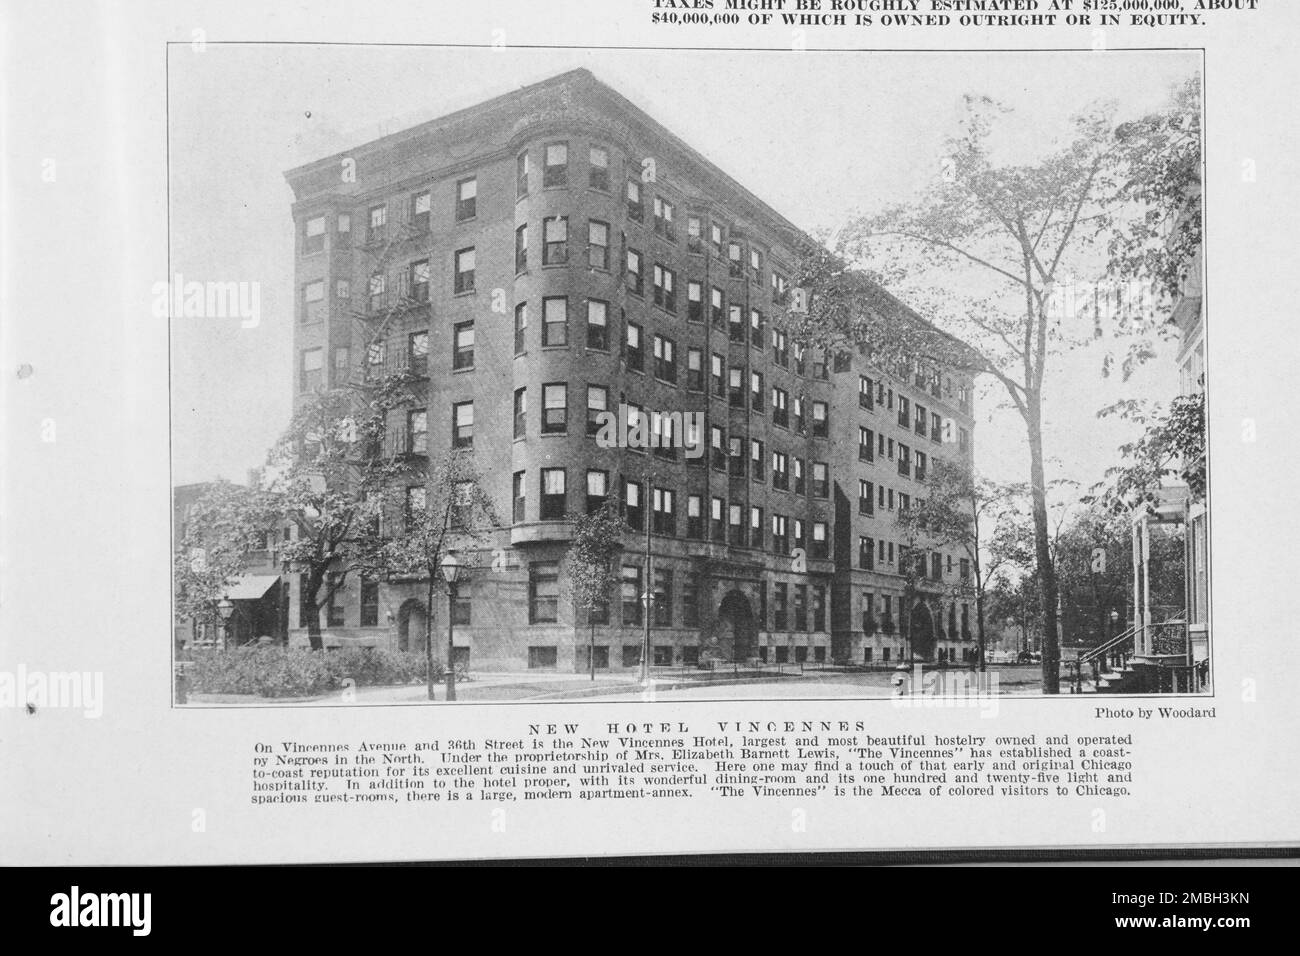 New Hotel Vincennes; On Vincennes Avenue and 36th Street is the New Vincennes Hotel, largest and most beautiful hostelry owned and operated by Negroes in the north, 1925. Stock Photo